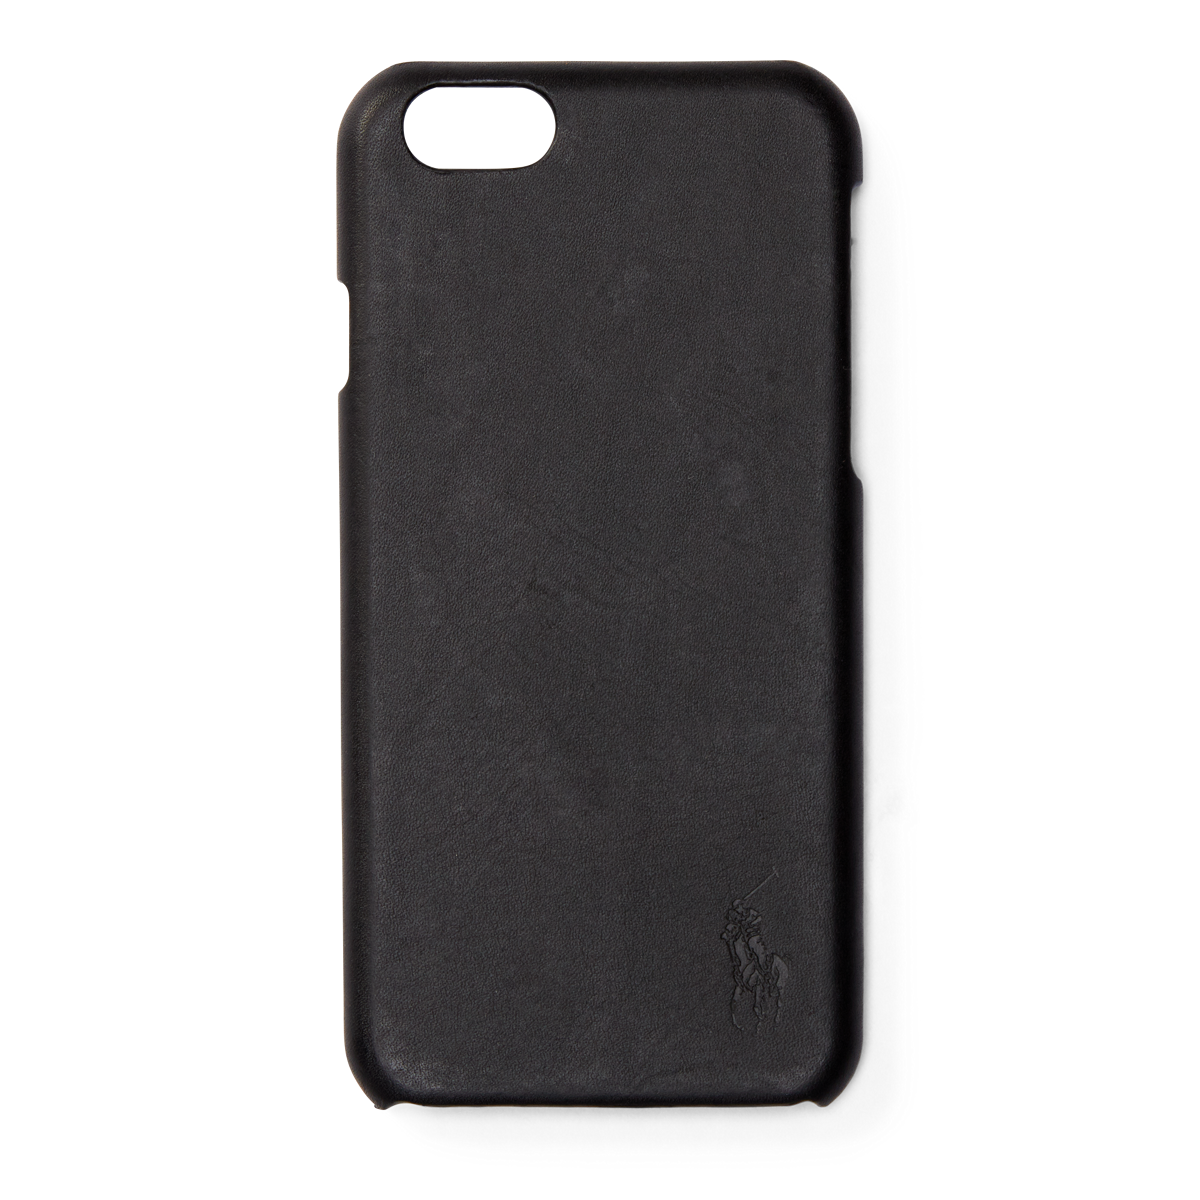 Leather iPhone 6 Case